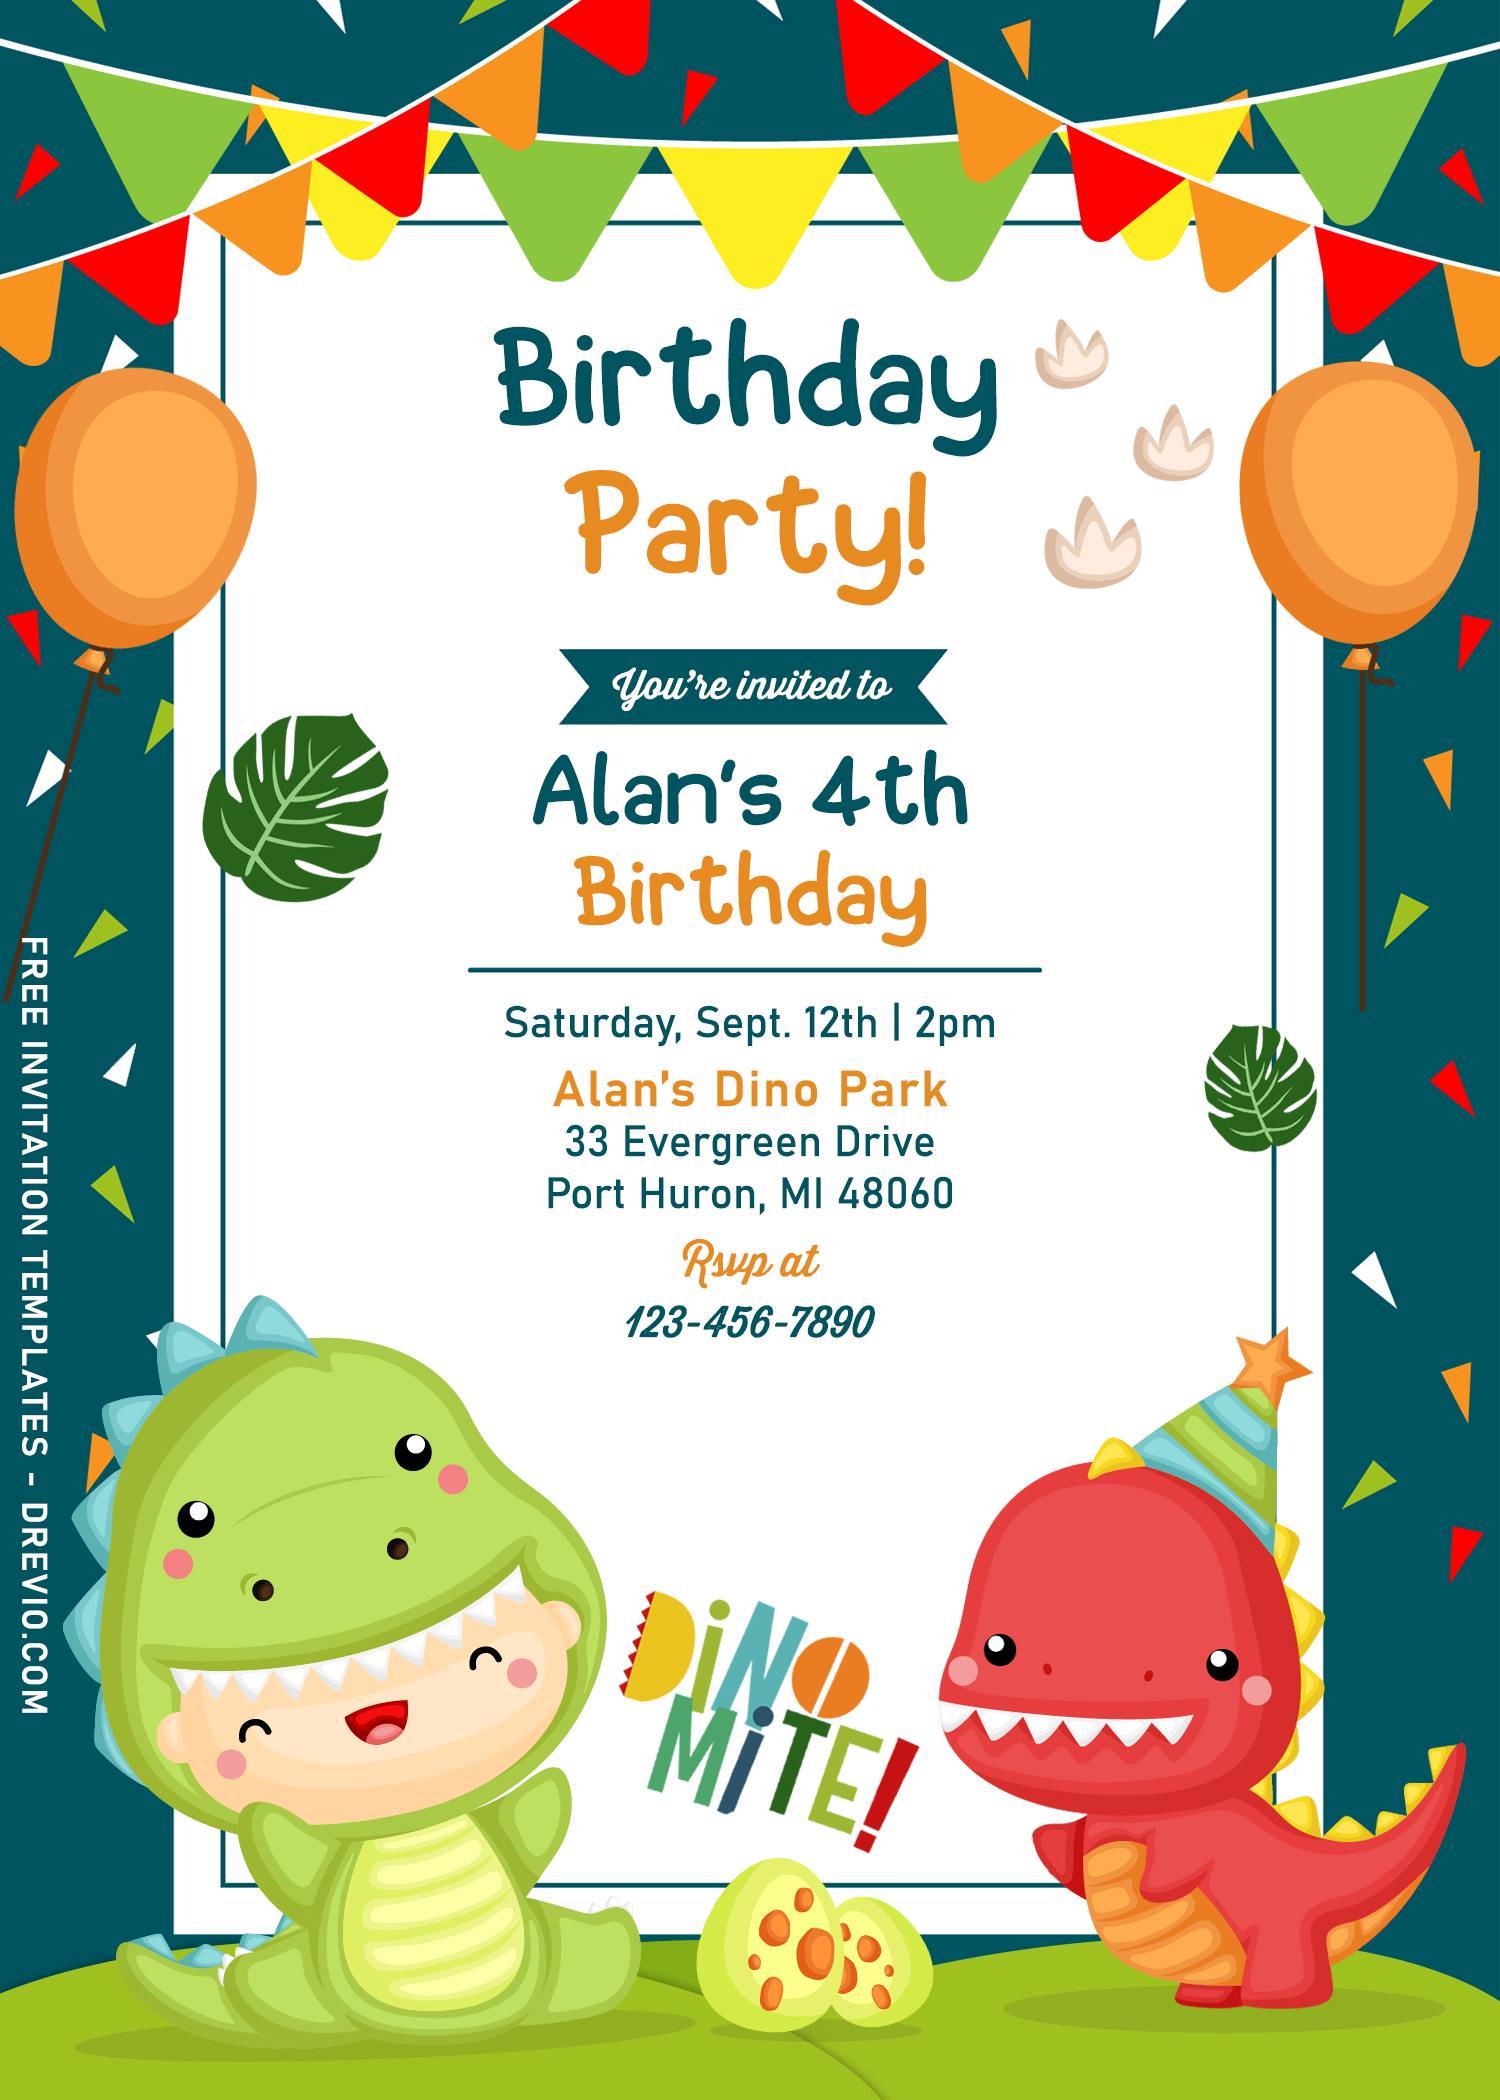 free-party-invitation-template